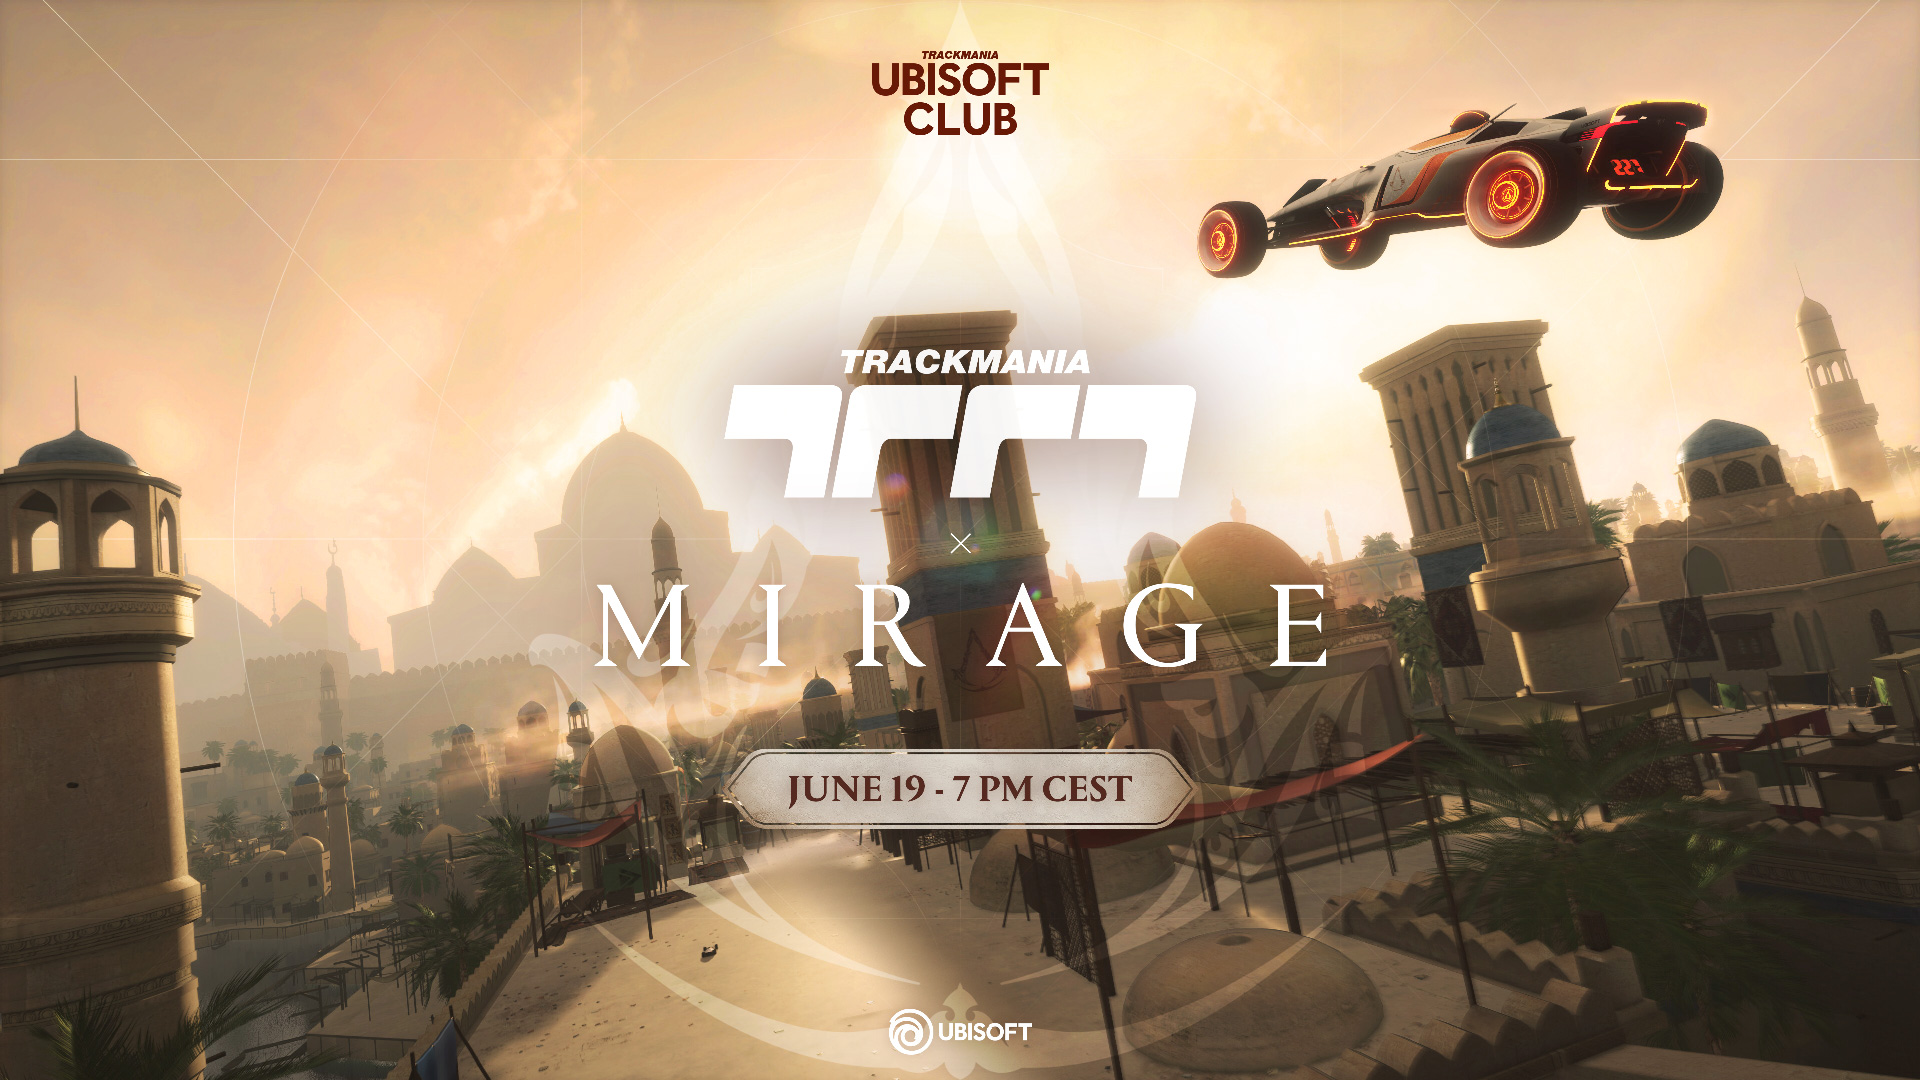 TRACKMANIA PARTNERS WITH ASSASSIN’S CREED MIRAGE FOR THE LAUNCH OF UBISOFT CLUB